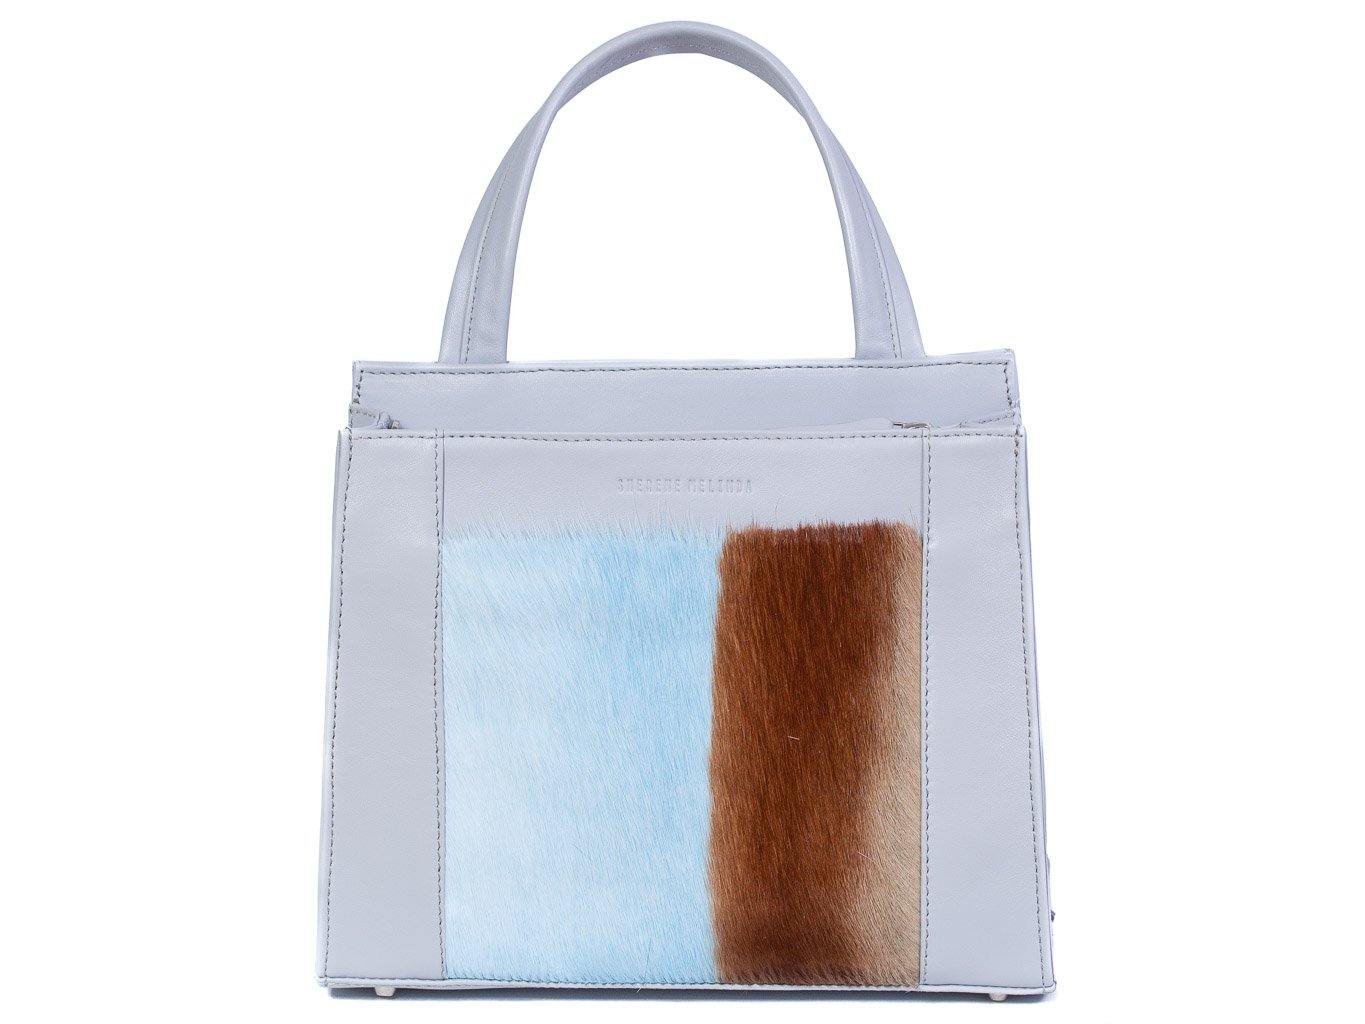 Top Handle Springbok Handbag in Baby Blue with a stripe feature by Sherene Melinda front